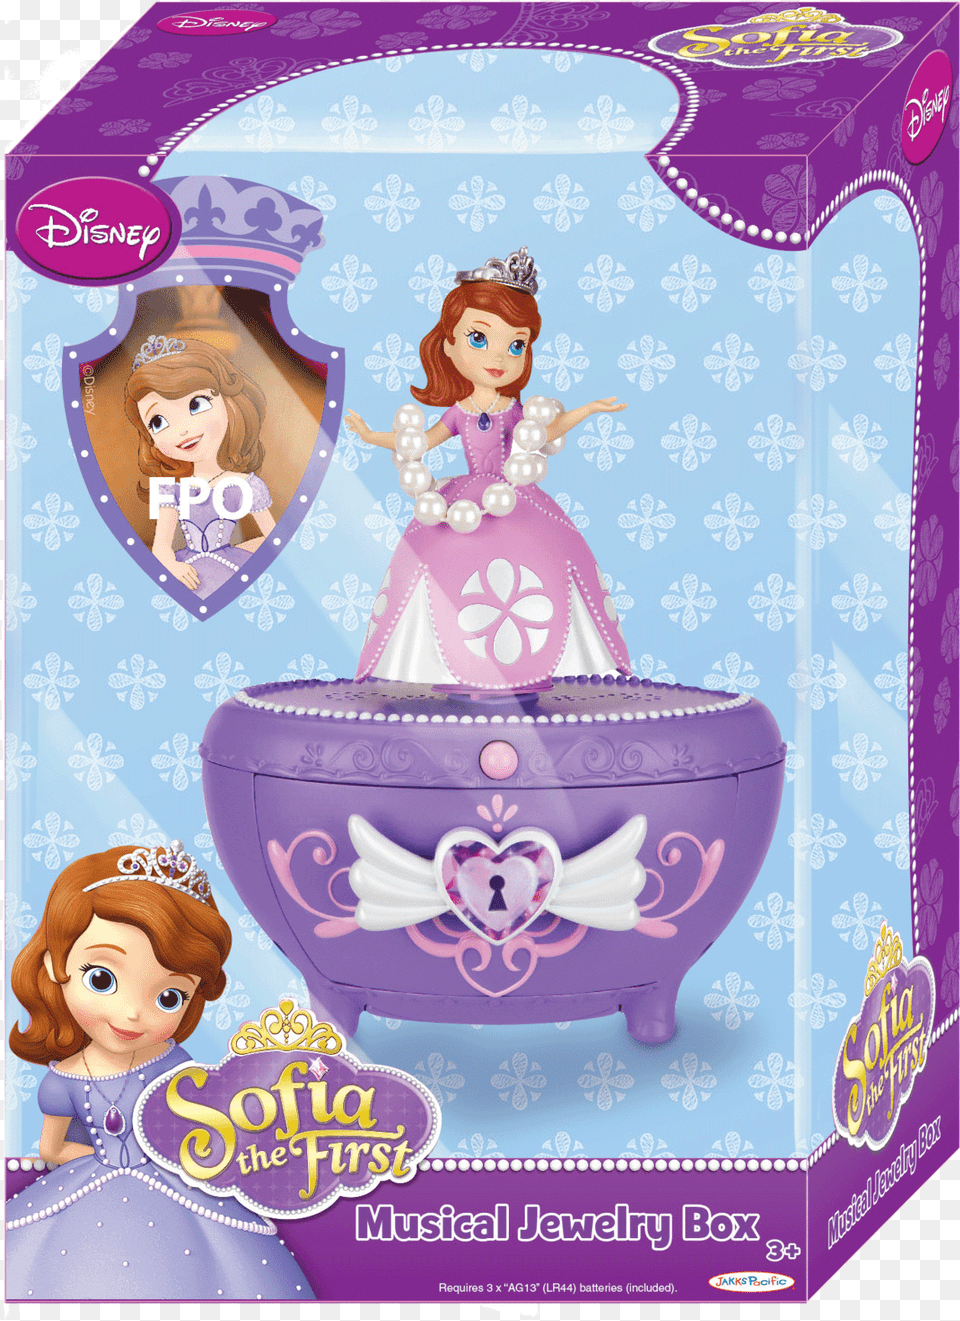 Disney Princess Rapunzel Musical Jewelry Box, Doll, Figurine, Toy, Baby Png Image